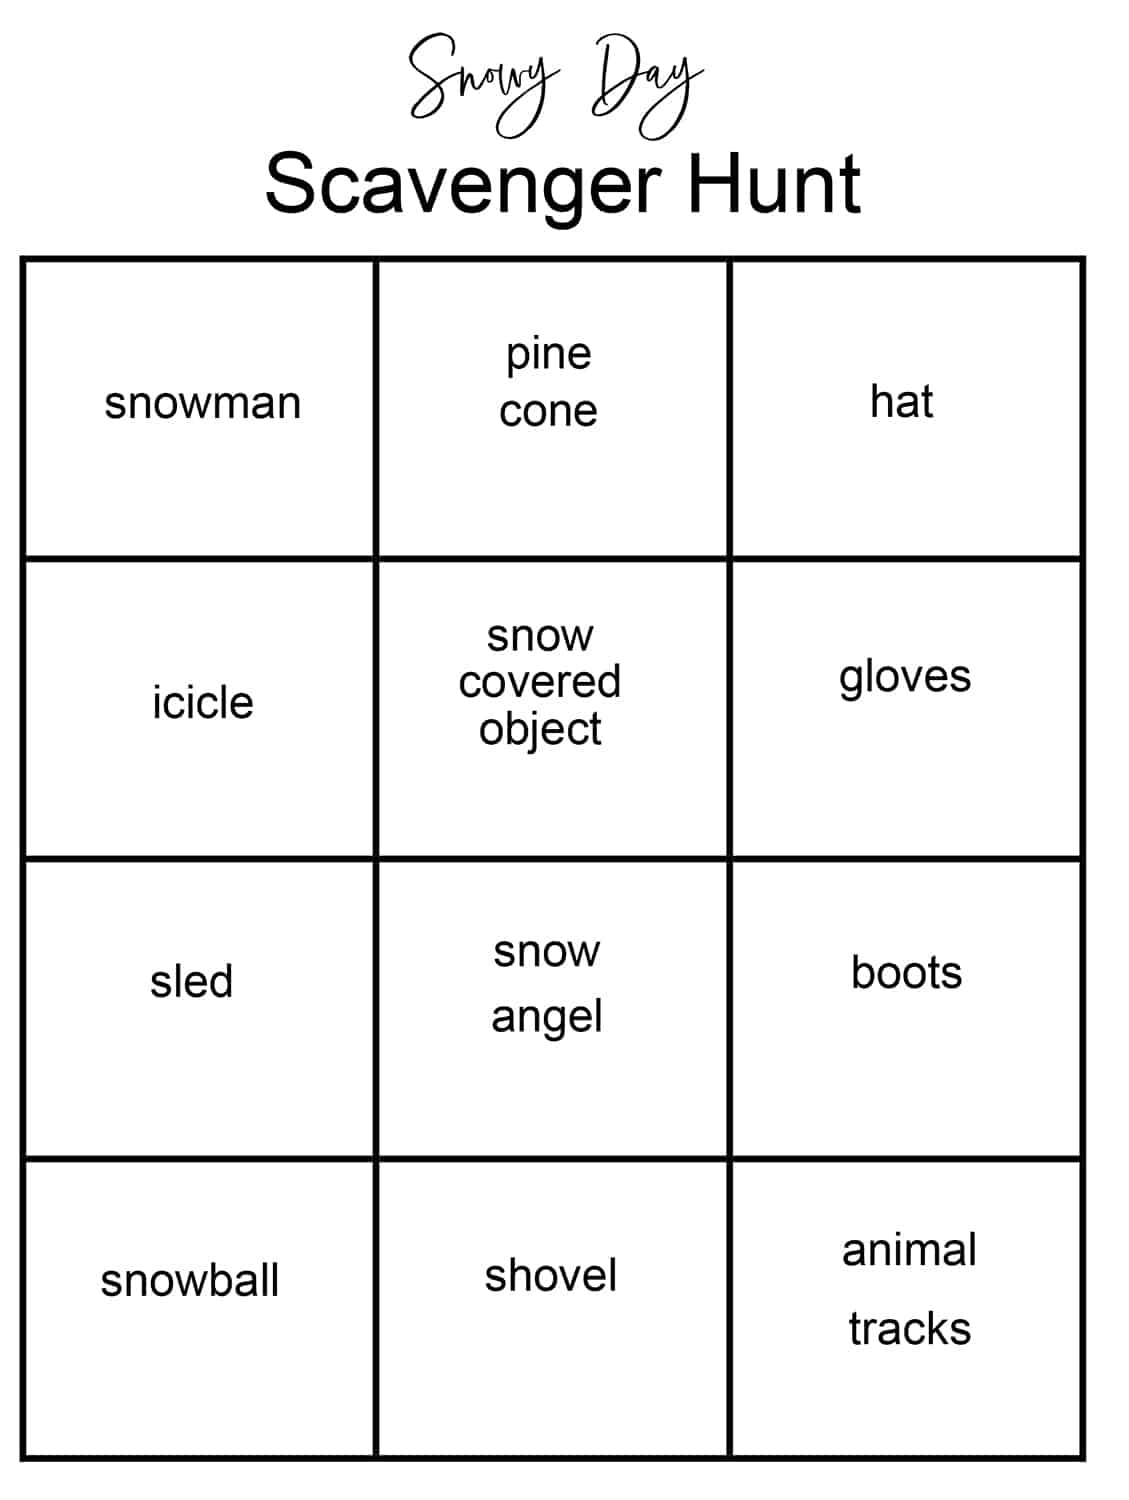 Snowy Day Outdoor Activity - winter photo scavenger hunt